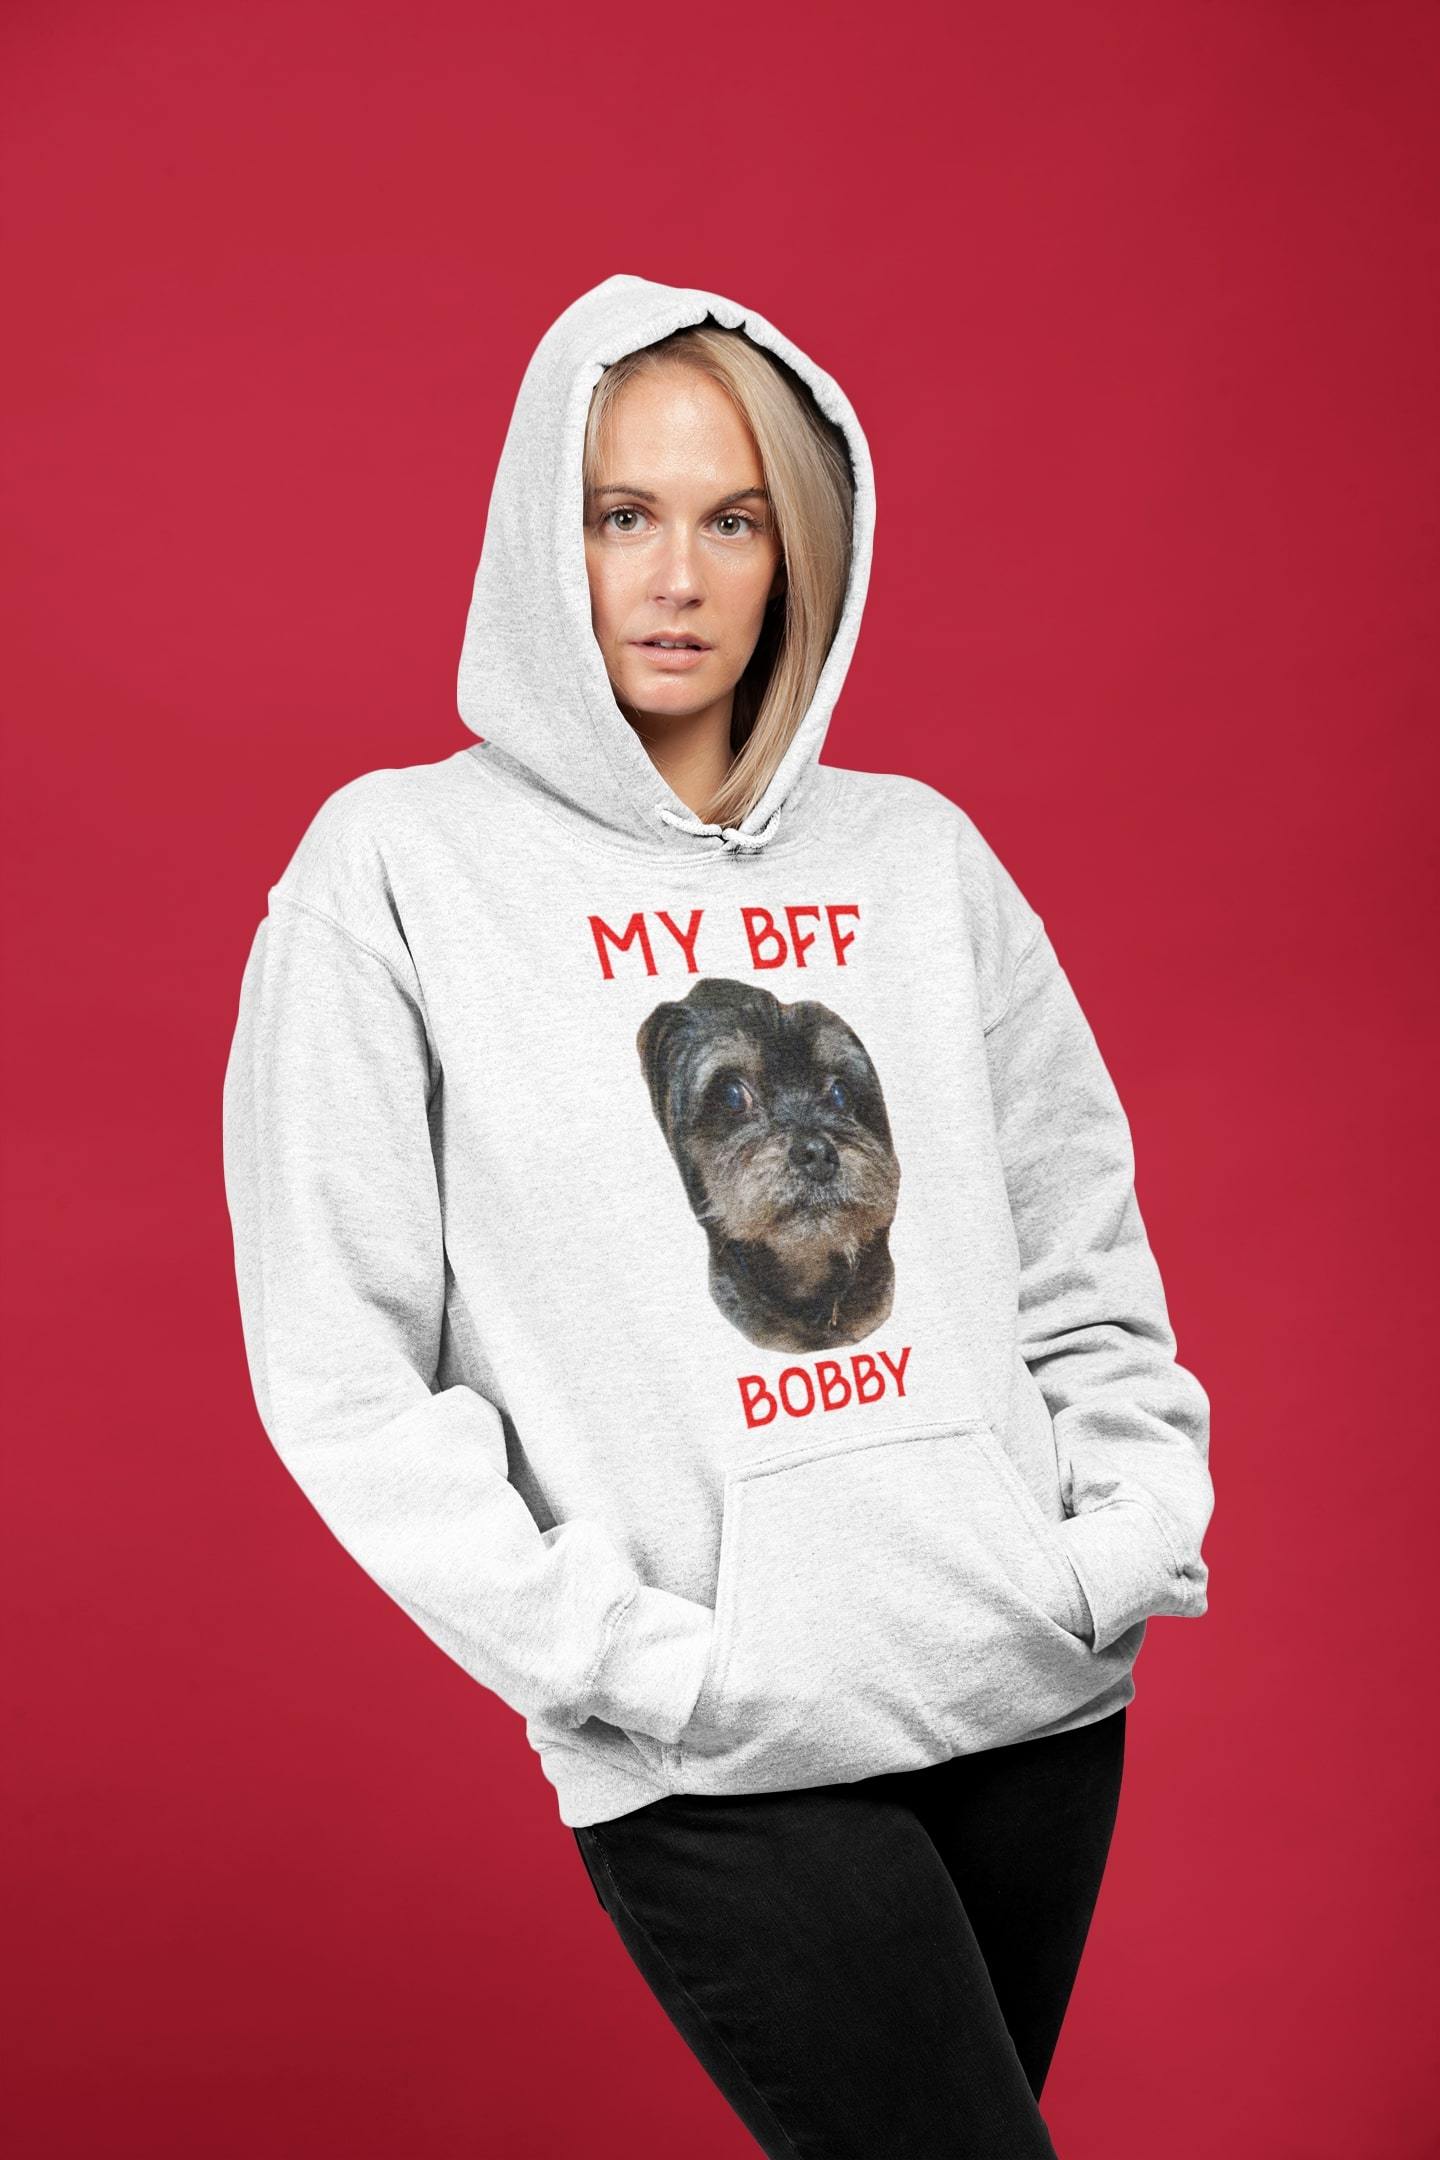 women's sweatshirts with dogs on them